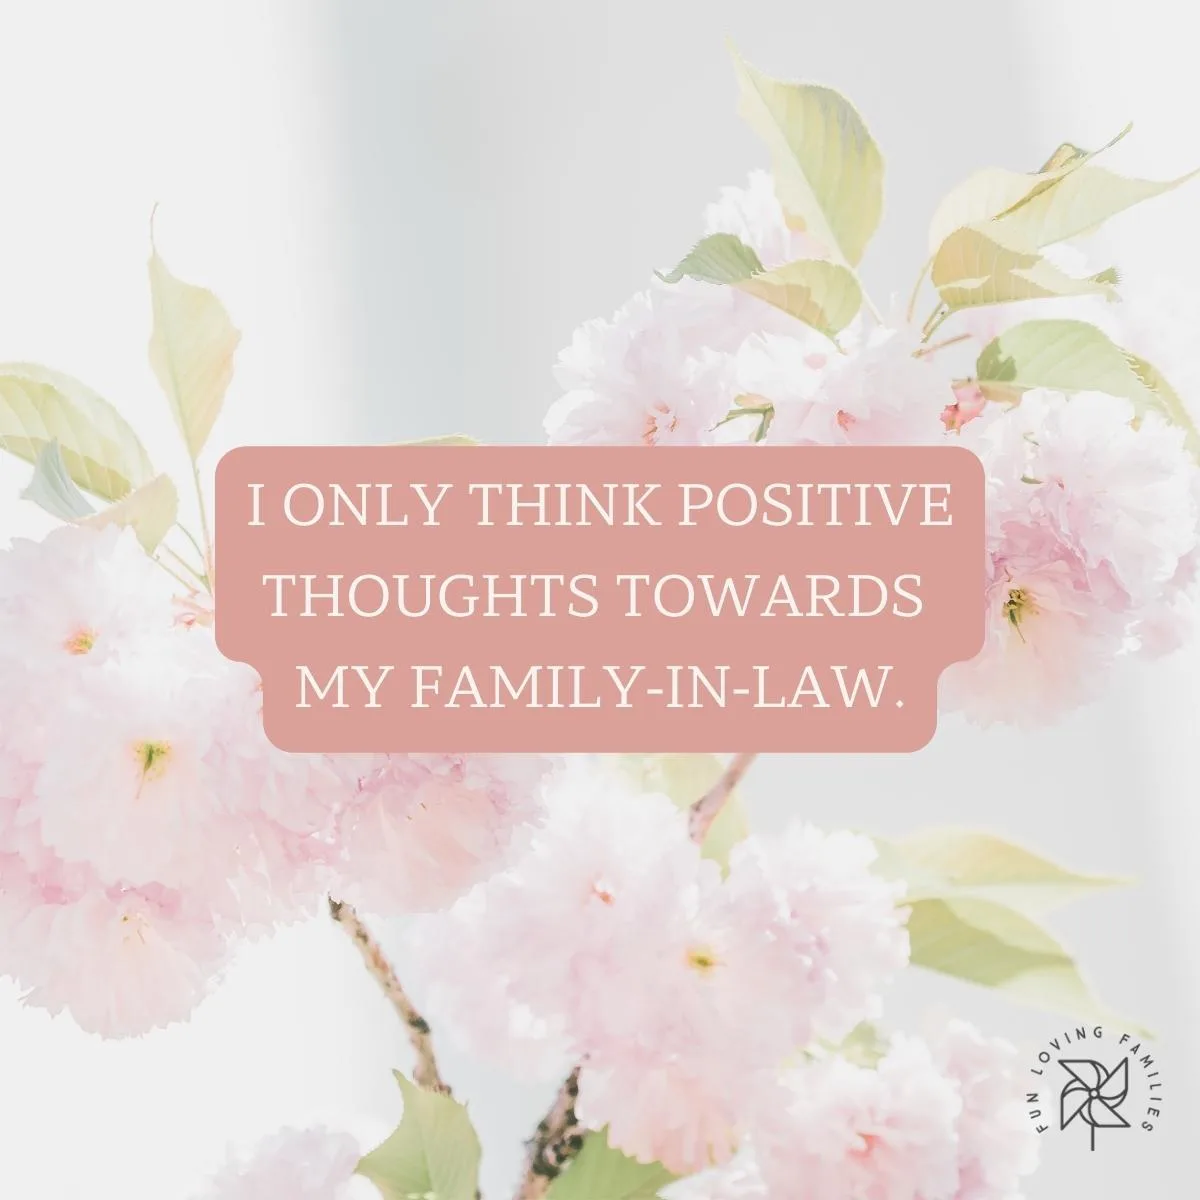 I only think positive thoughts towards my family-in-law affirmation